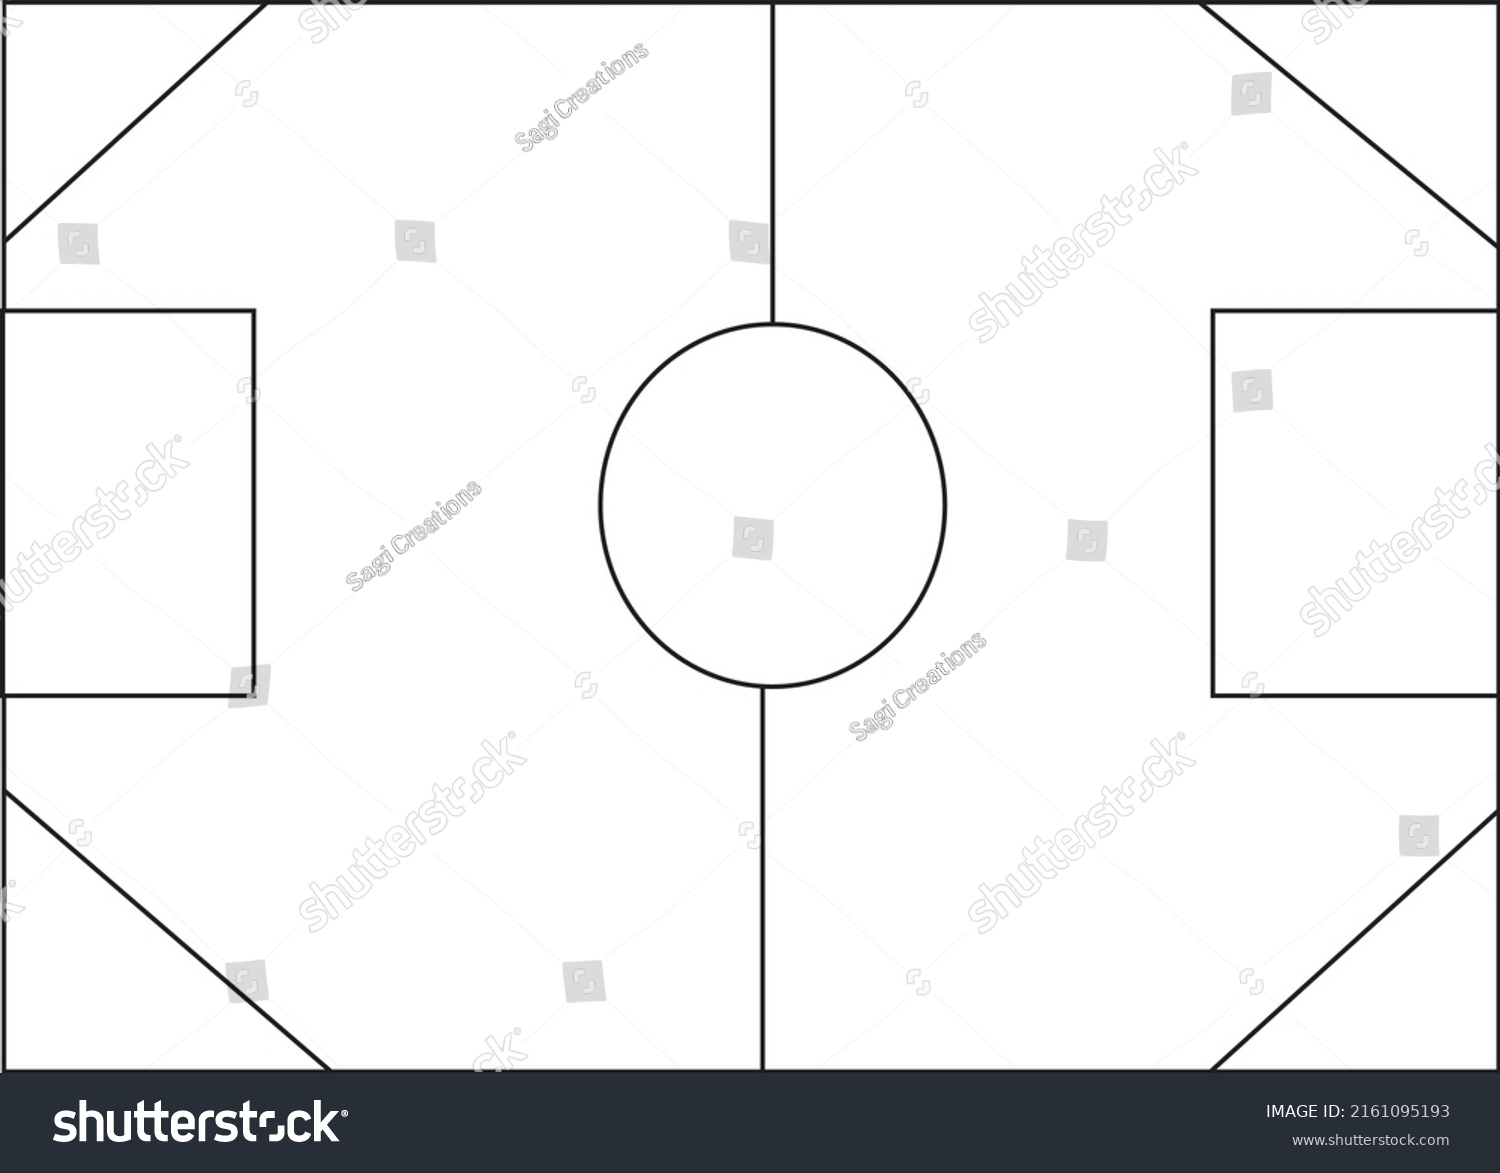 Football Ground Vector Illustration Image Clipart Stock Vector (Royalty ...